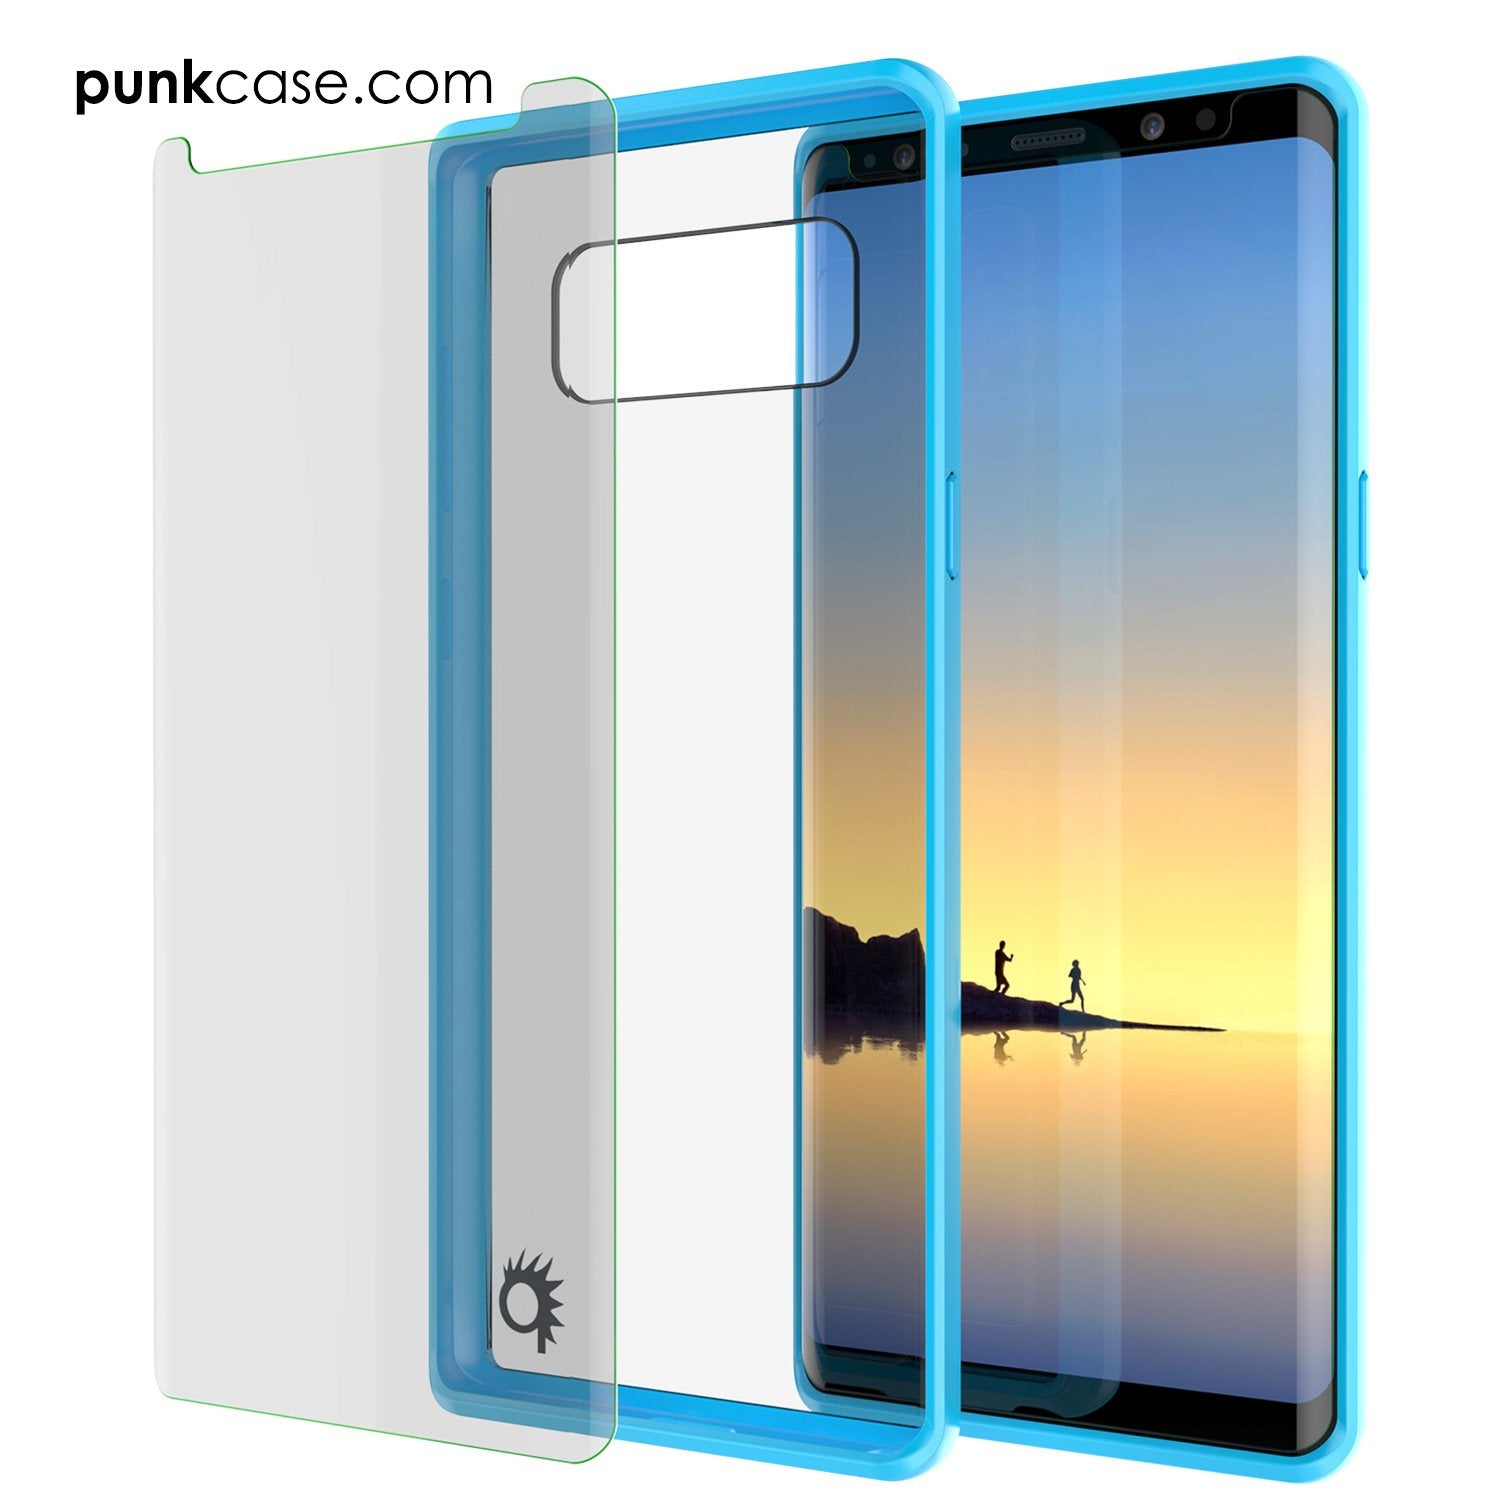 Galaxy Note 8 Case, PUNKcase [LUCID 2.0 Series] [Slim Fit] Armor Cover w/Integrated Anti-Shock System & PUNKSHIELD Screen Protector [Light Blue] - PunkCase NZ